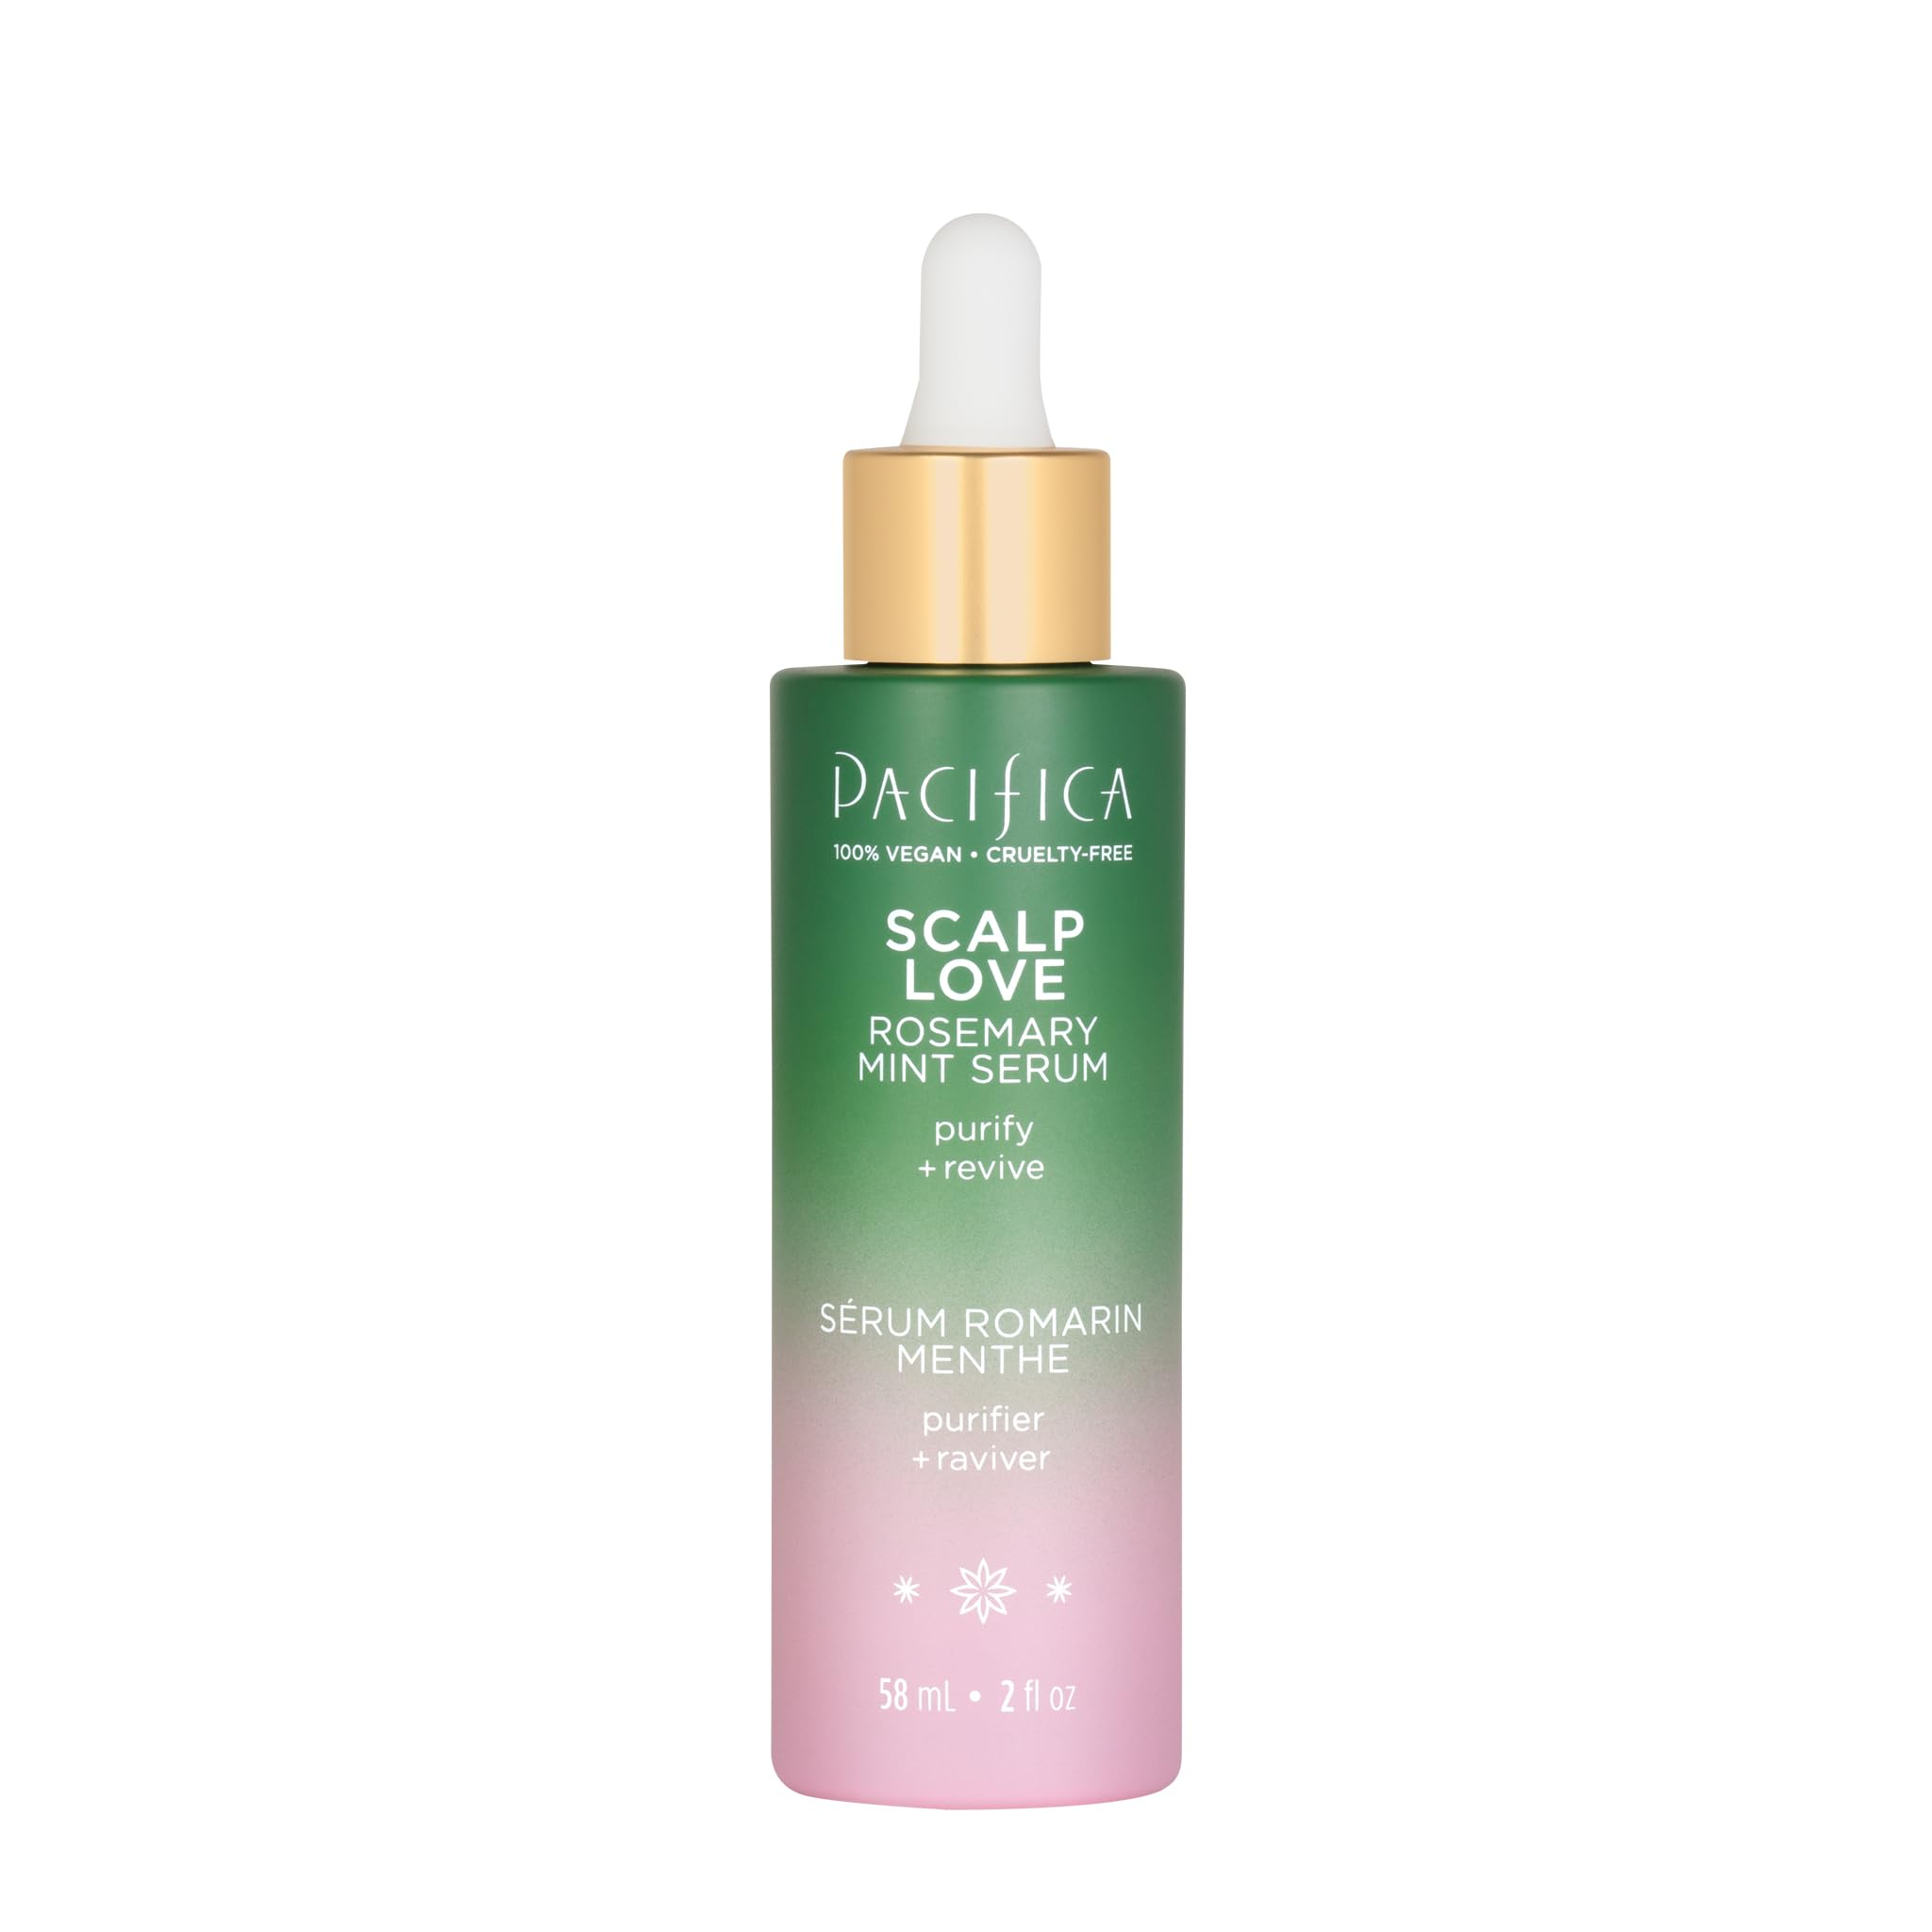 2-Oz Pacifica Scalp Love Rosemary Mint Serum $6.45 w/ S&S + Free Shipping w/ Prime or on $35+